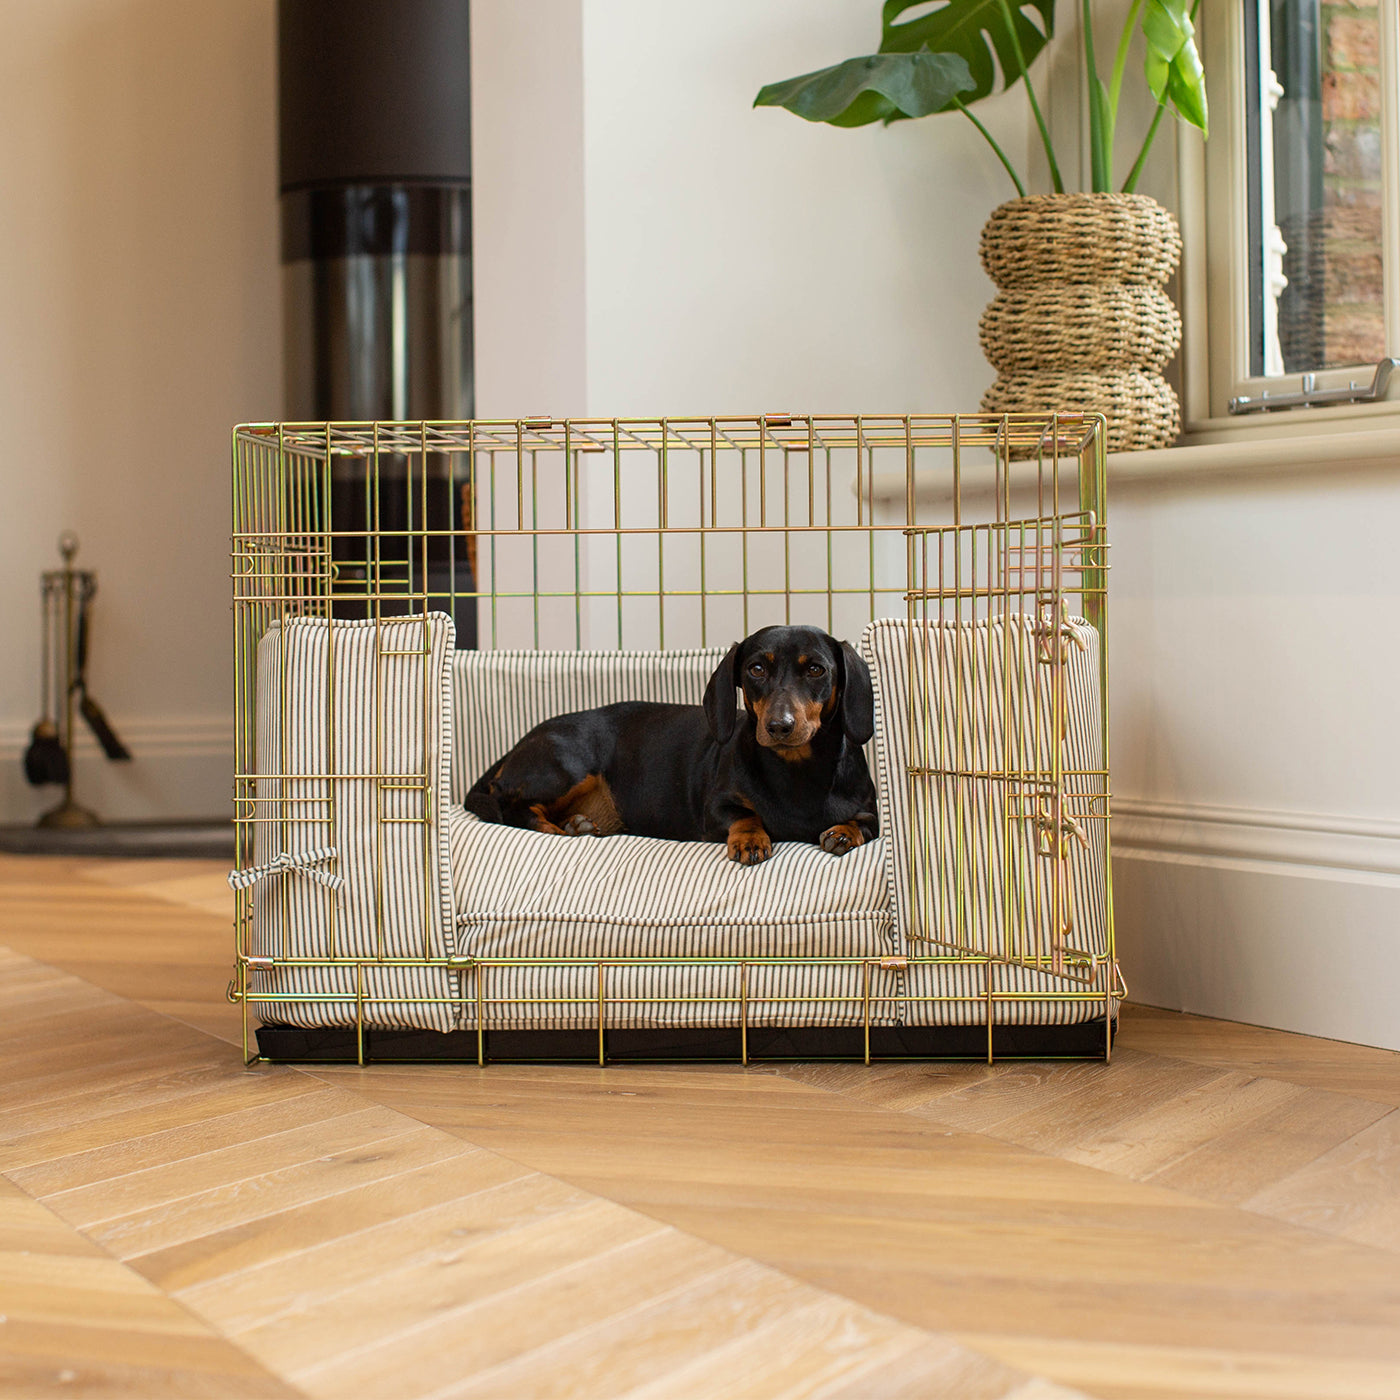 Luxury Gold Dog Cage Set With Cushion, Bumper and Cage Cover, in Regency Stripe. The Perfect Dog Cage For The Ultimate Naptime, Available Now at Lords & Labradors US